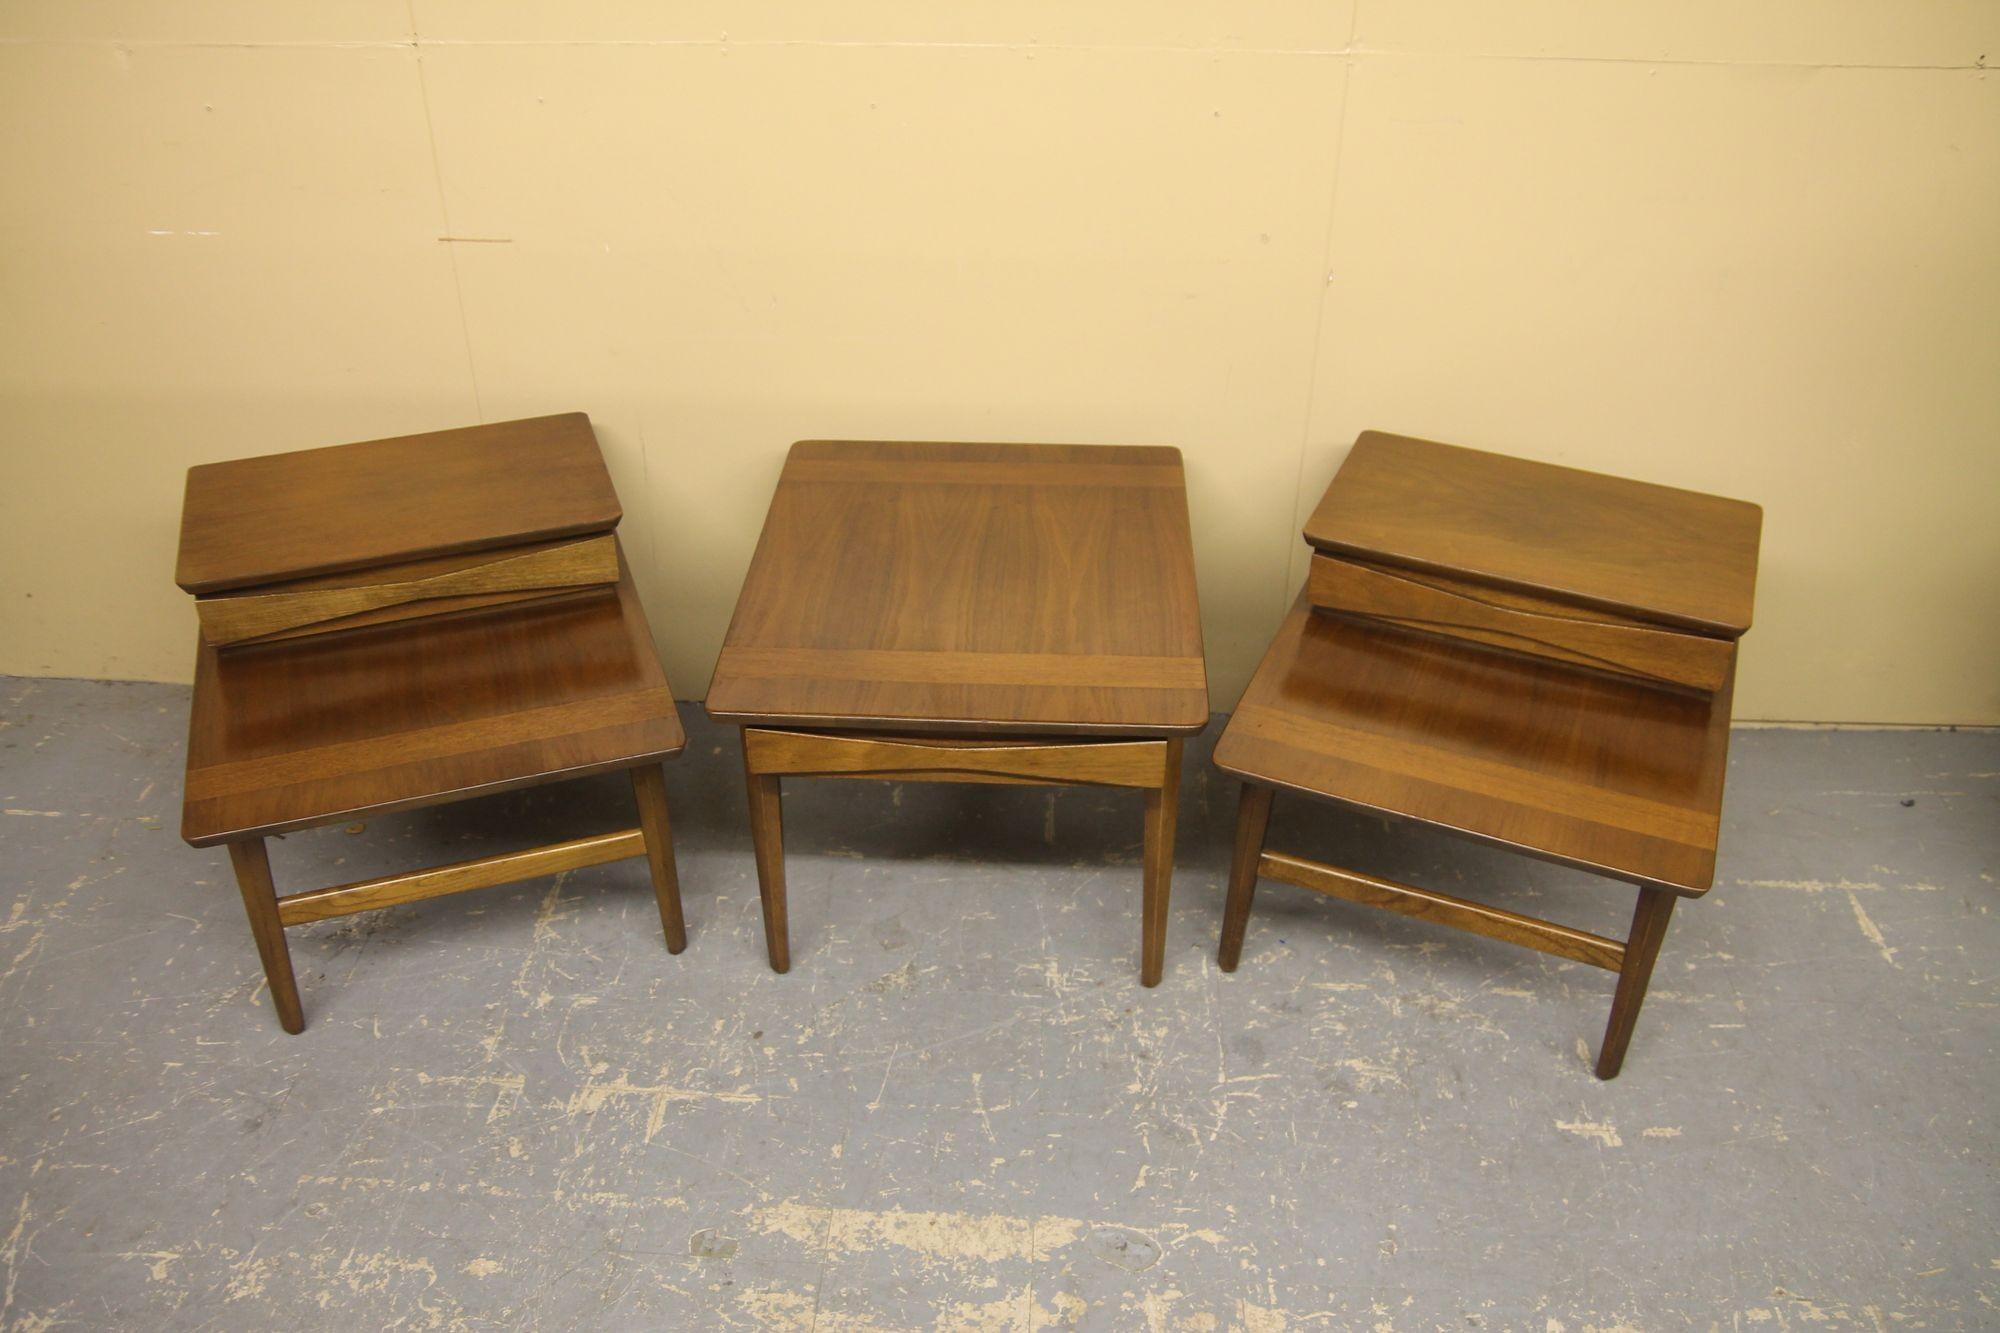 Great 3 piece table set from American of Martinsville. I have not seen this design come to market yet. These table are made of walnut and have the unique bowtie draw fronts on them. 
Single side table/coffee table is 22.5 x 27 x 19.25
Two end